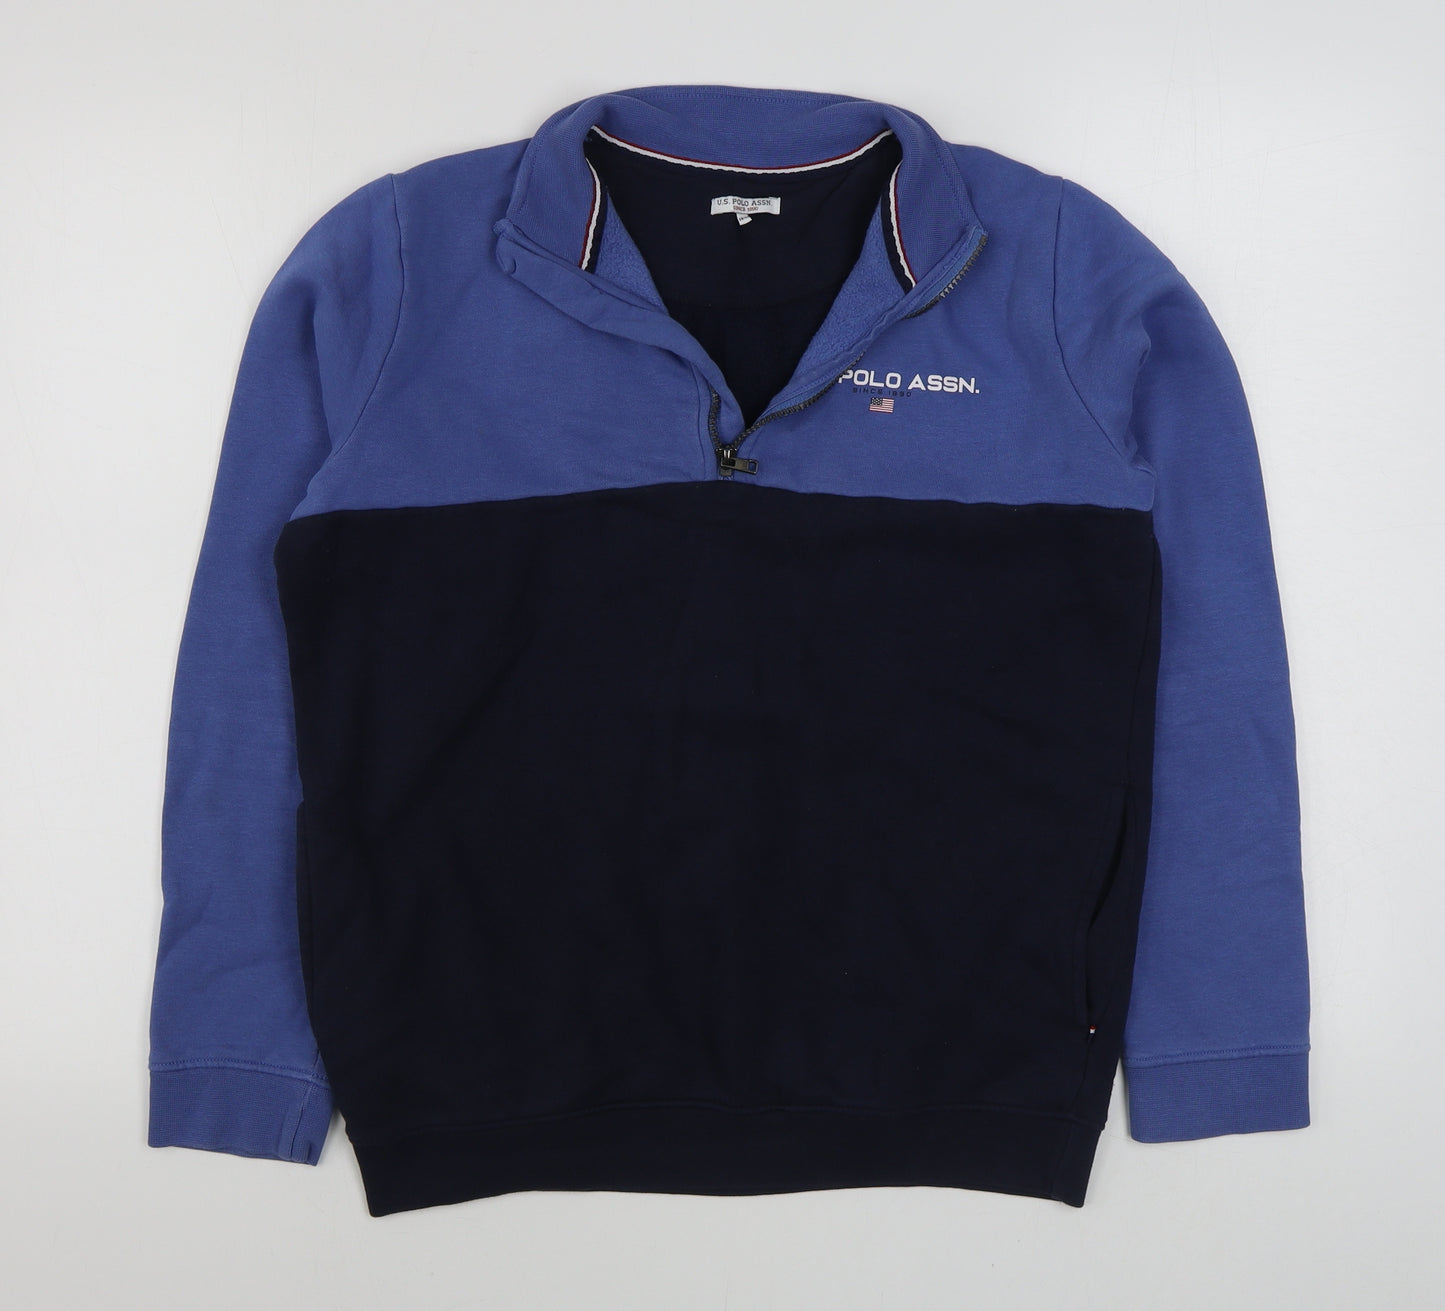 US Polo Assn. Boys Blue   Jacket  Size 14-15 Years  Zip